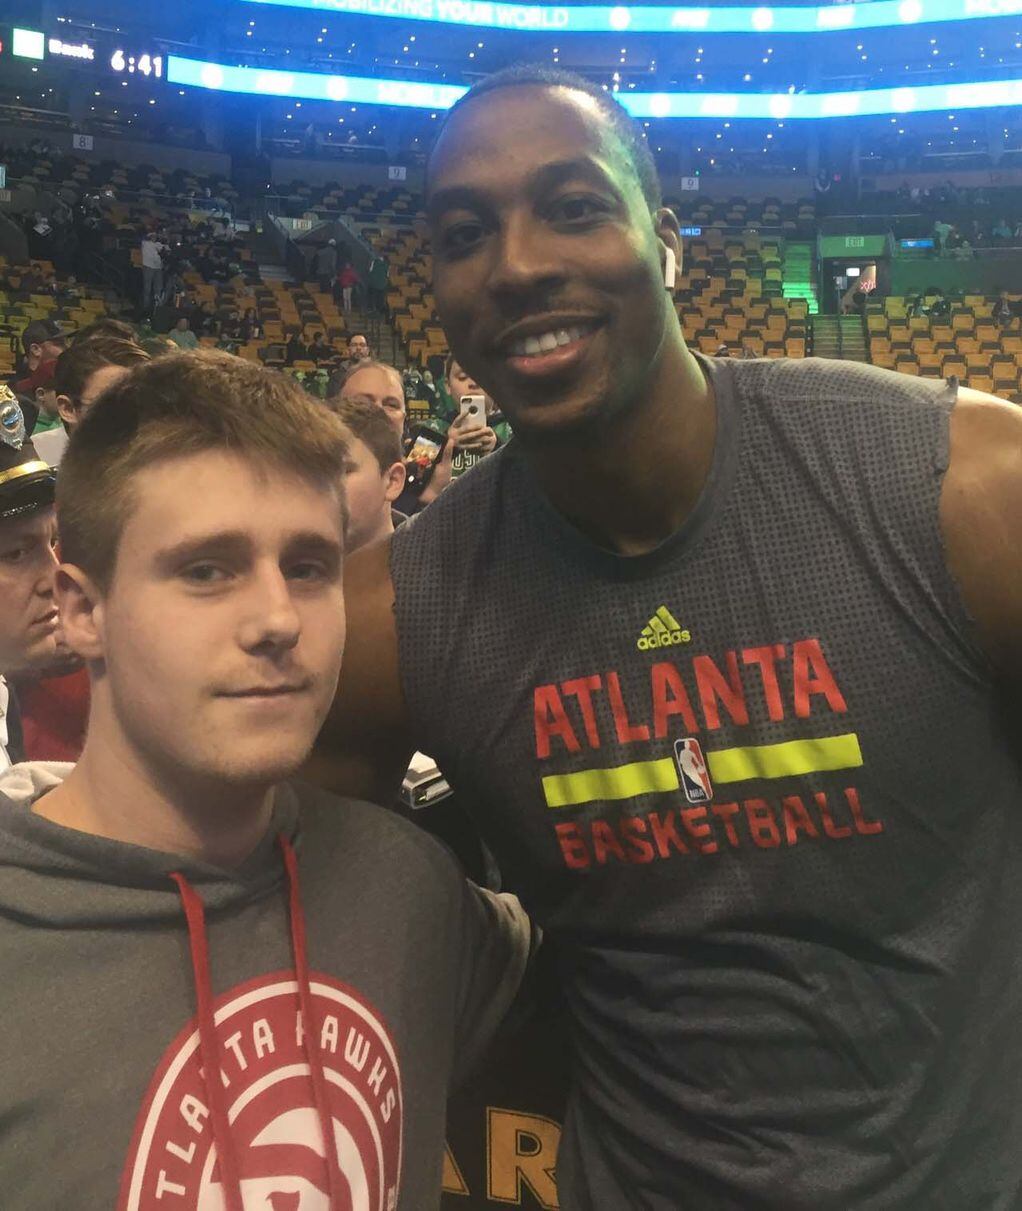 Dwight Howard gives jersey to young Celtics fan, then asks for a